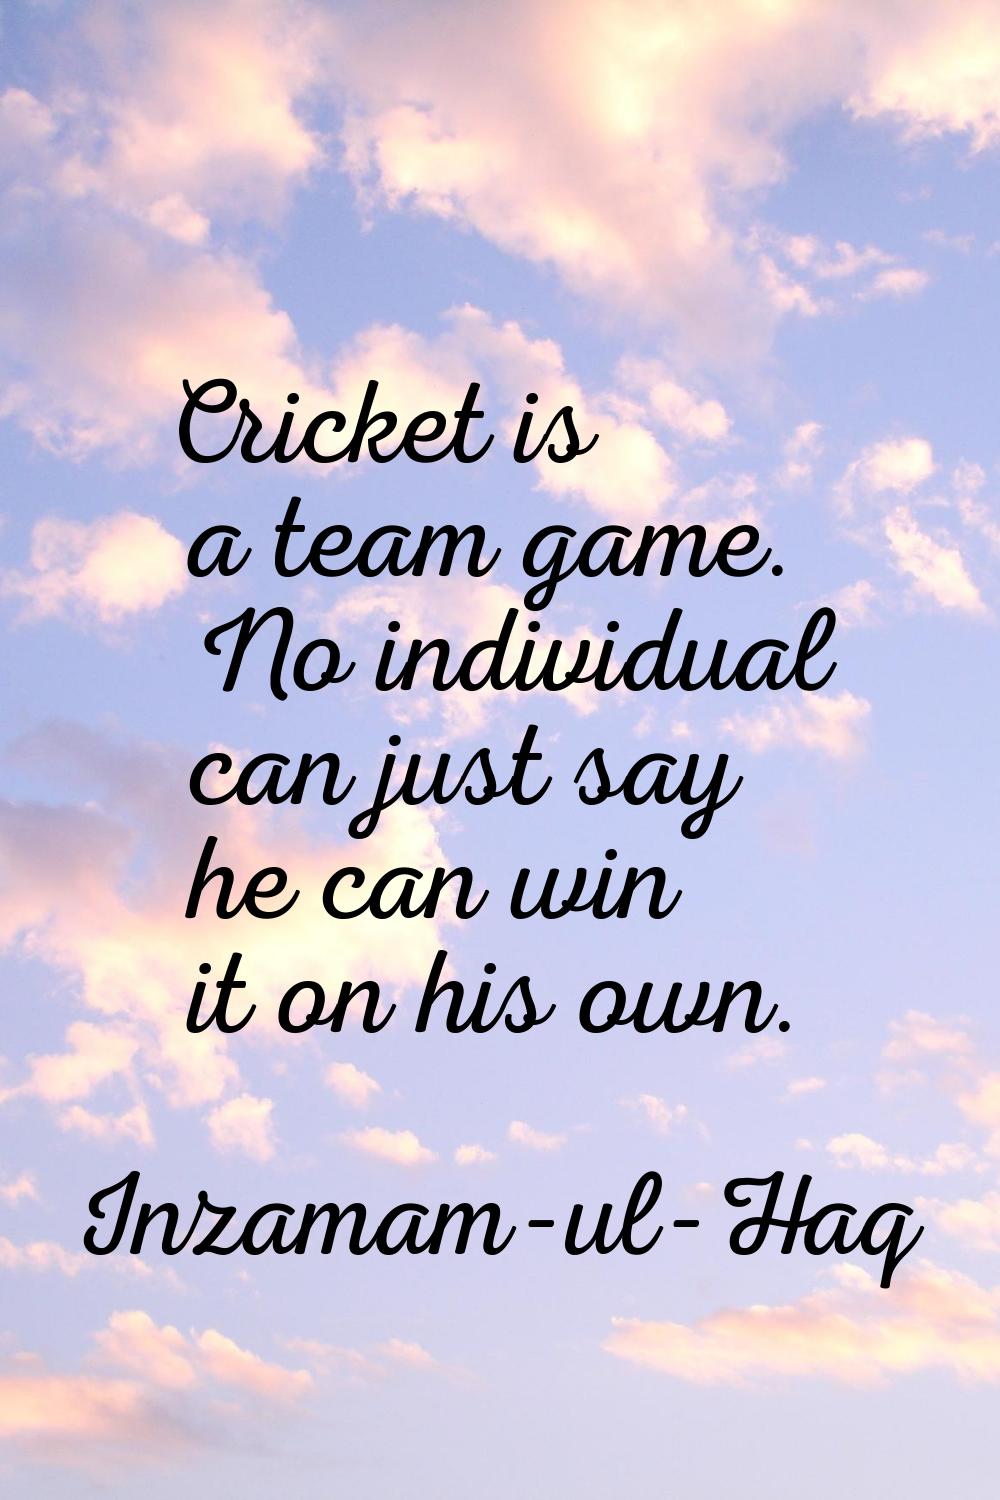 Cricket is a team game. No individual can just say he can win it on his own.